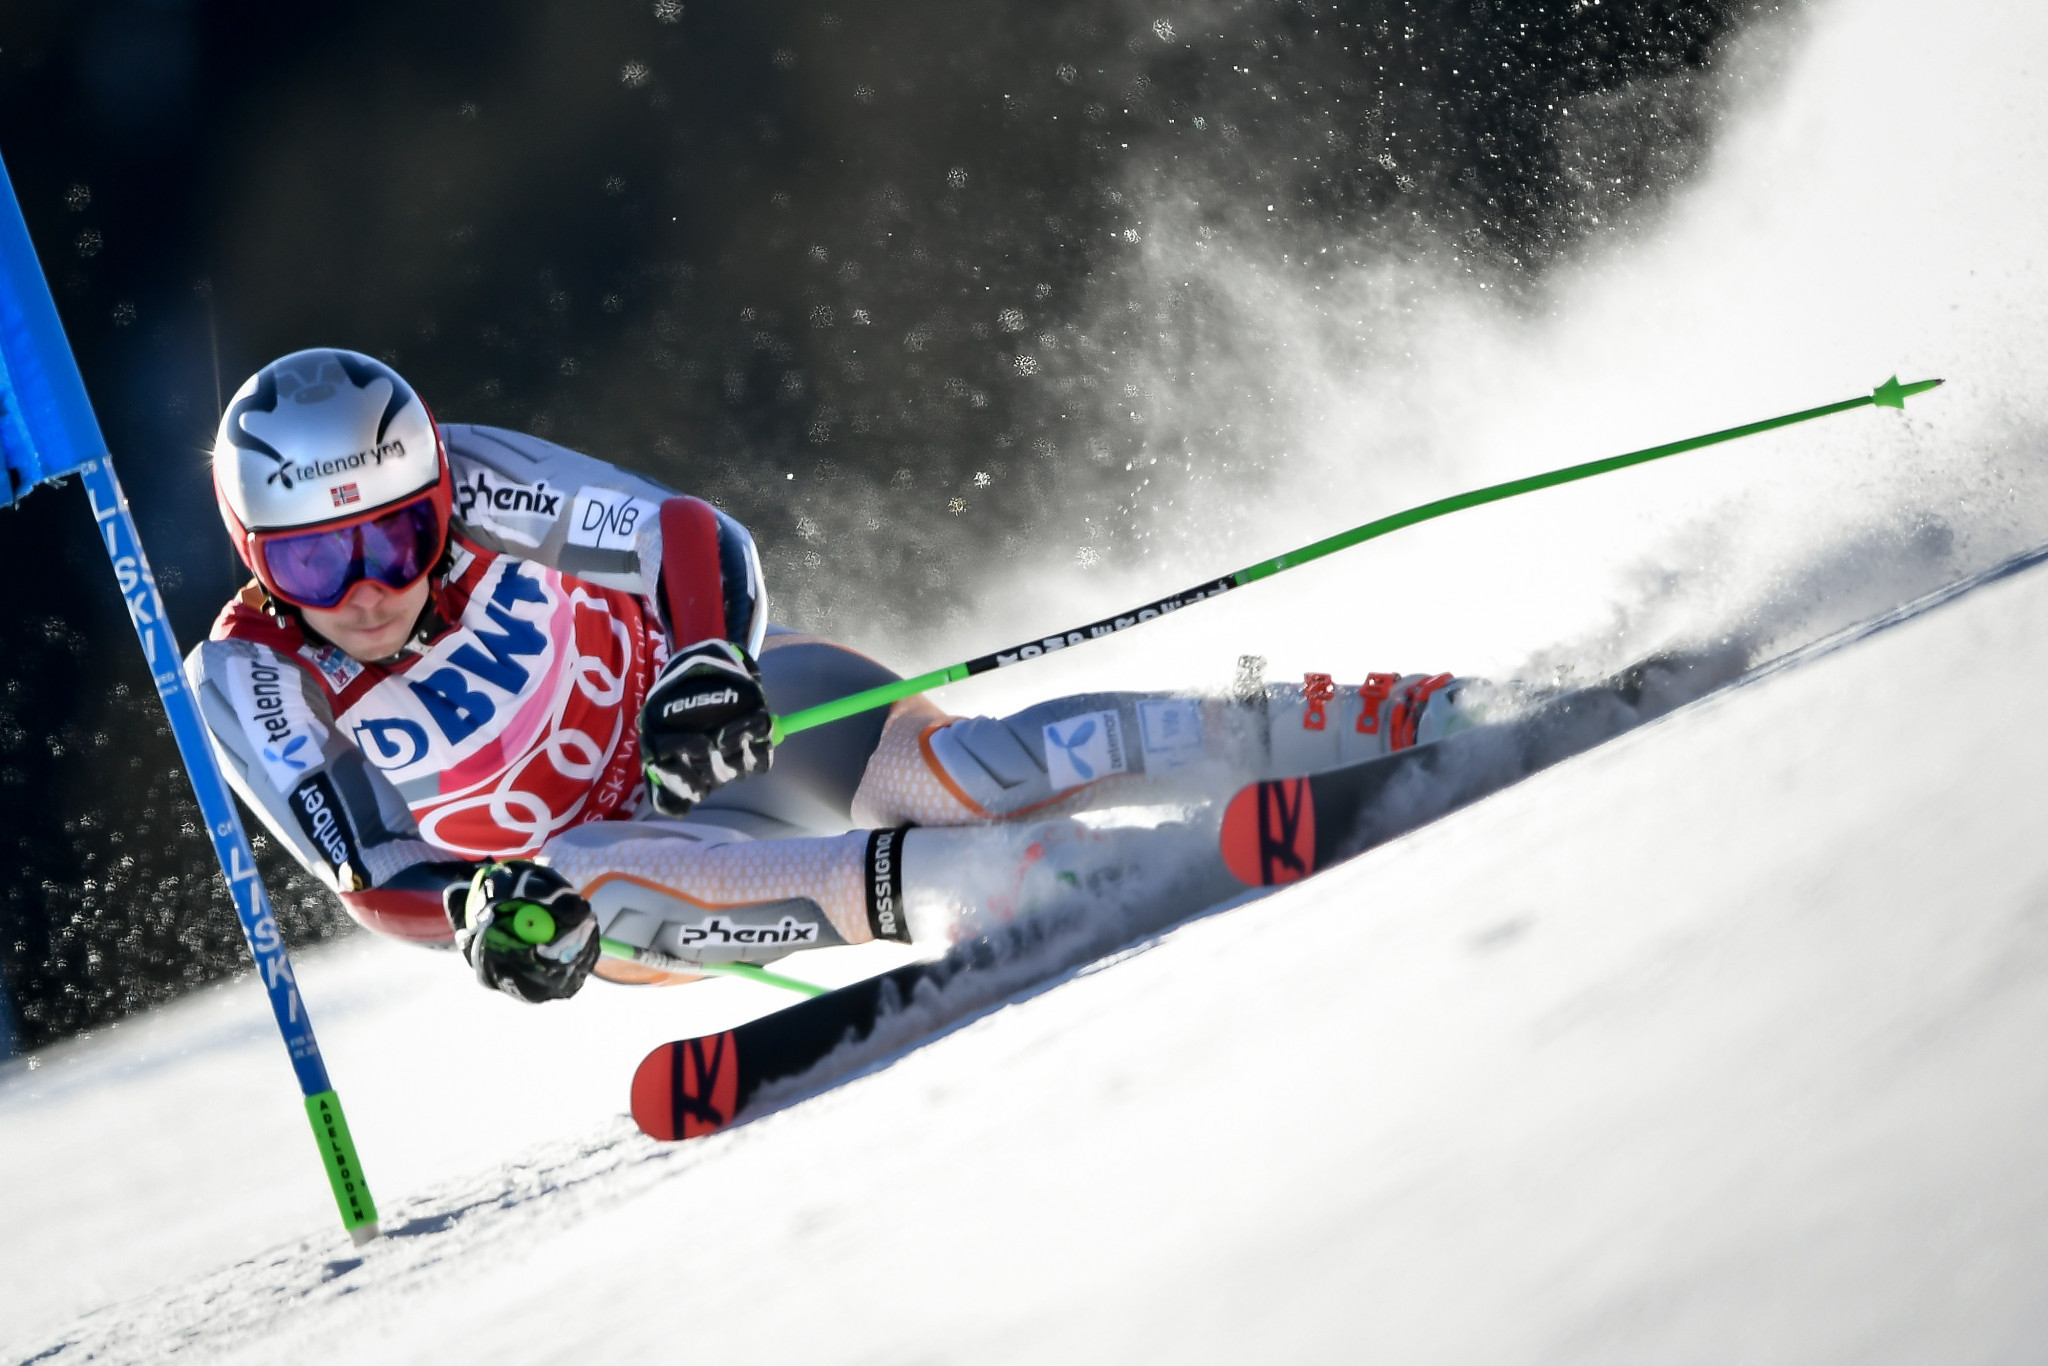 Kristoffersen retakes FIS Alpine Skiing World Cup lead after third place in Adelboden